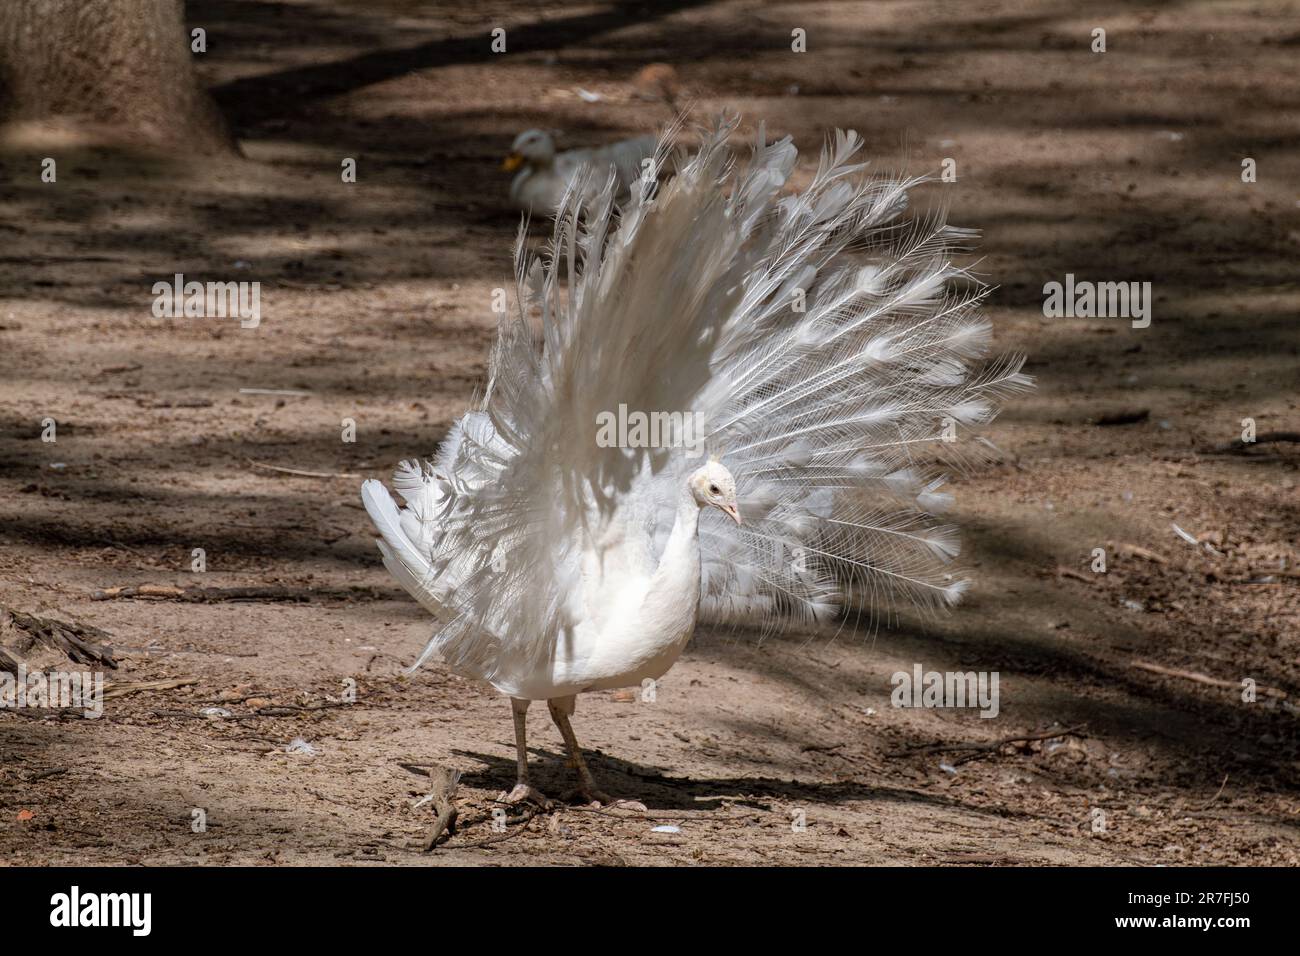 White Peafowl male demonstrating tail. Bird with leucism, white feathers in sunny aviary with blurred background Stock Photo